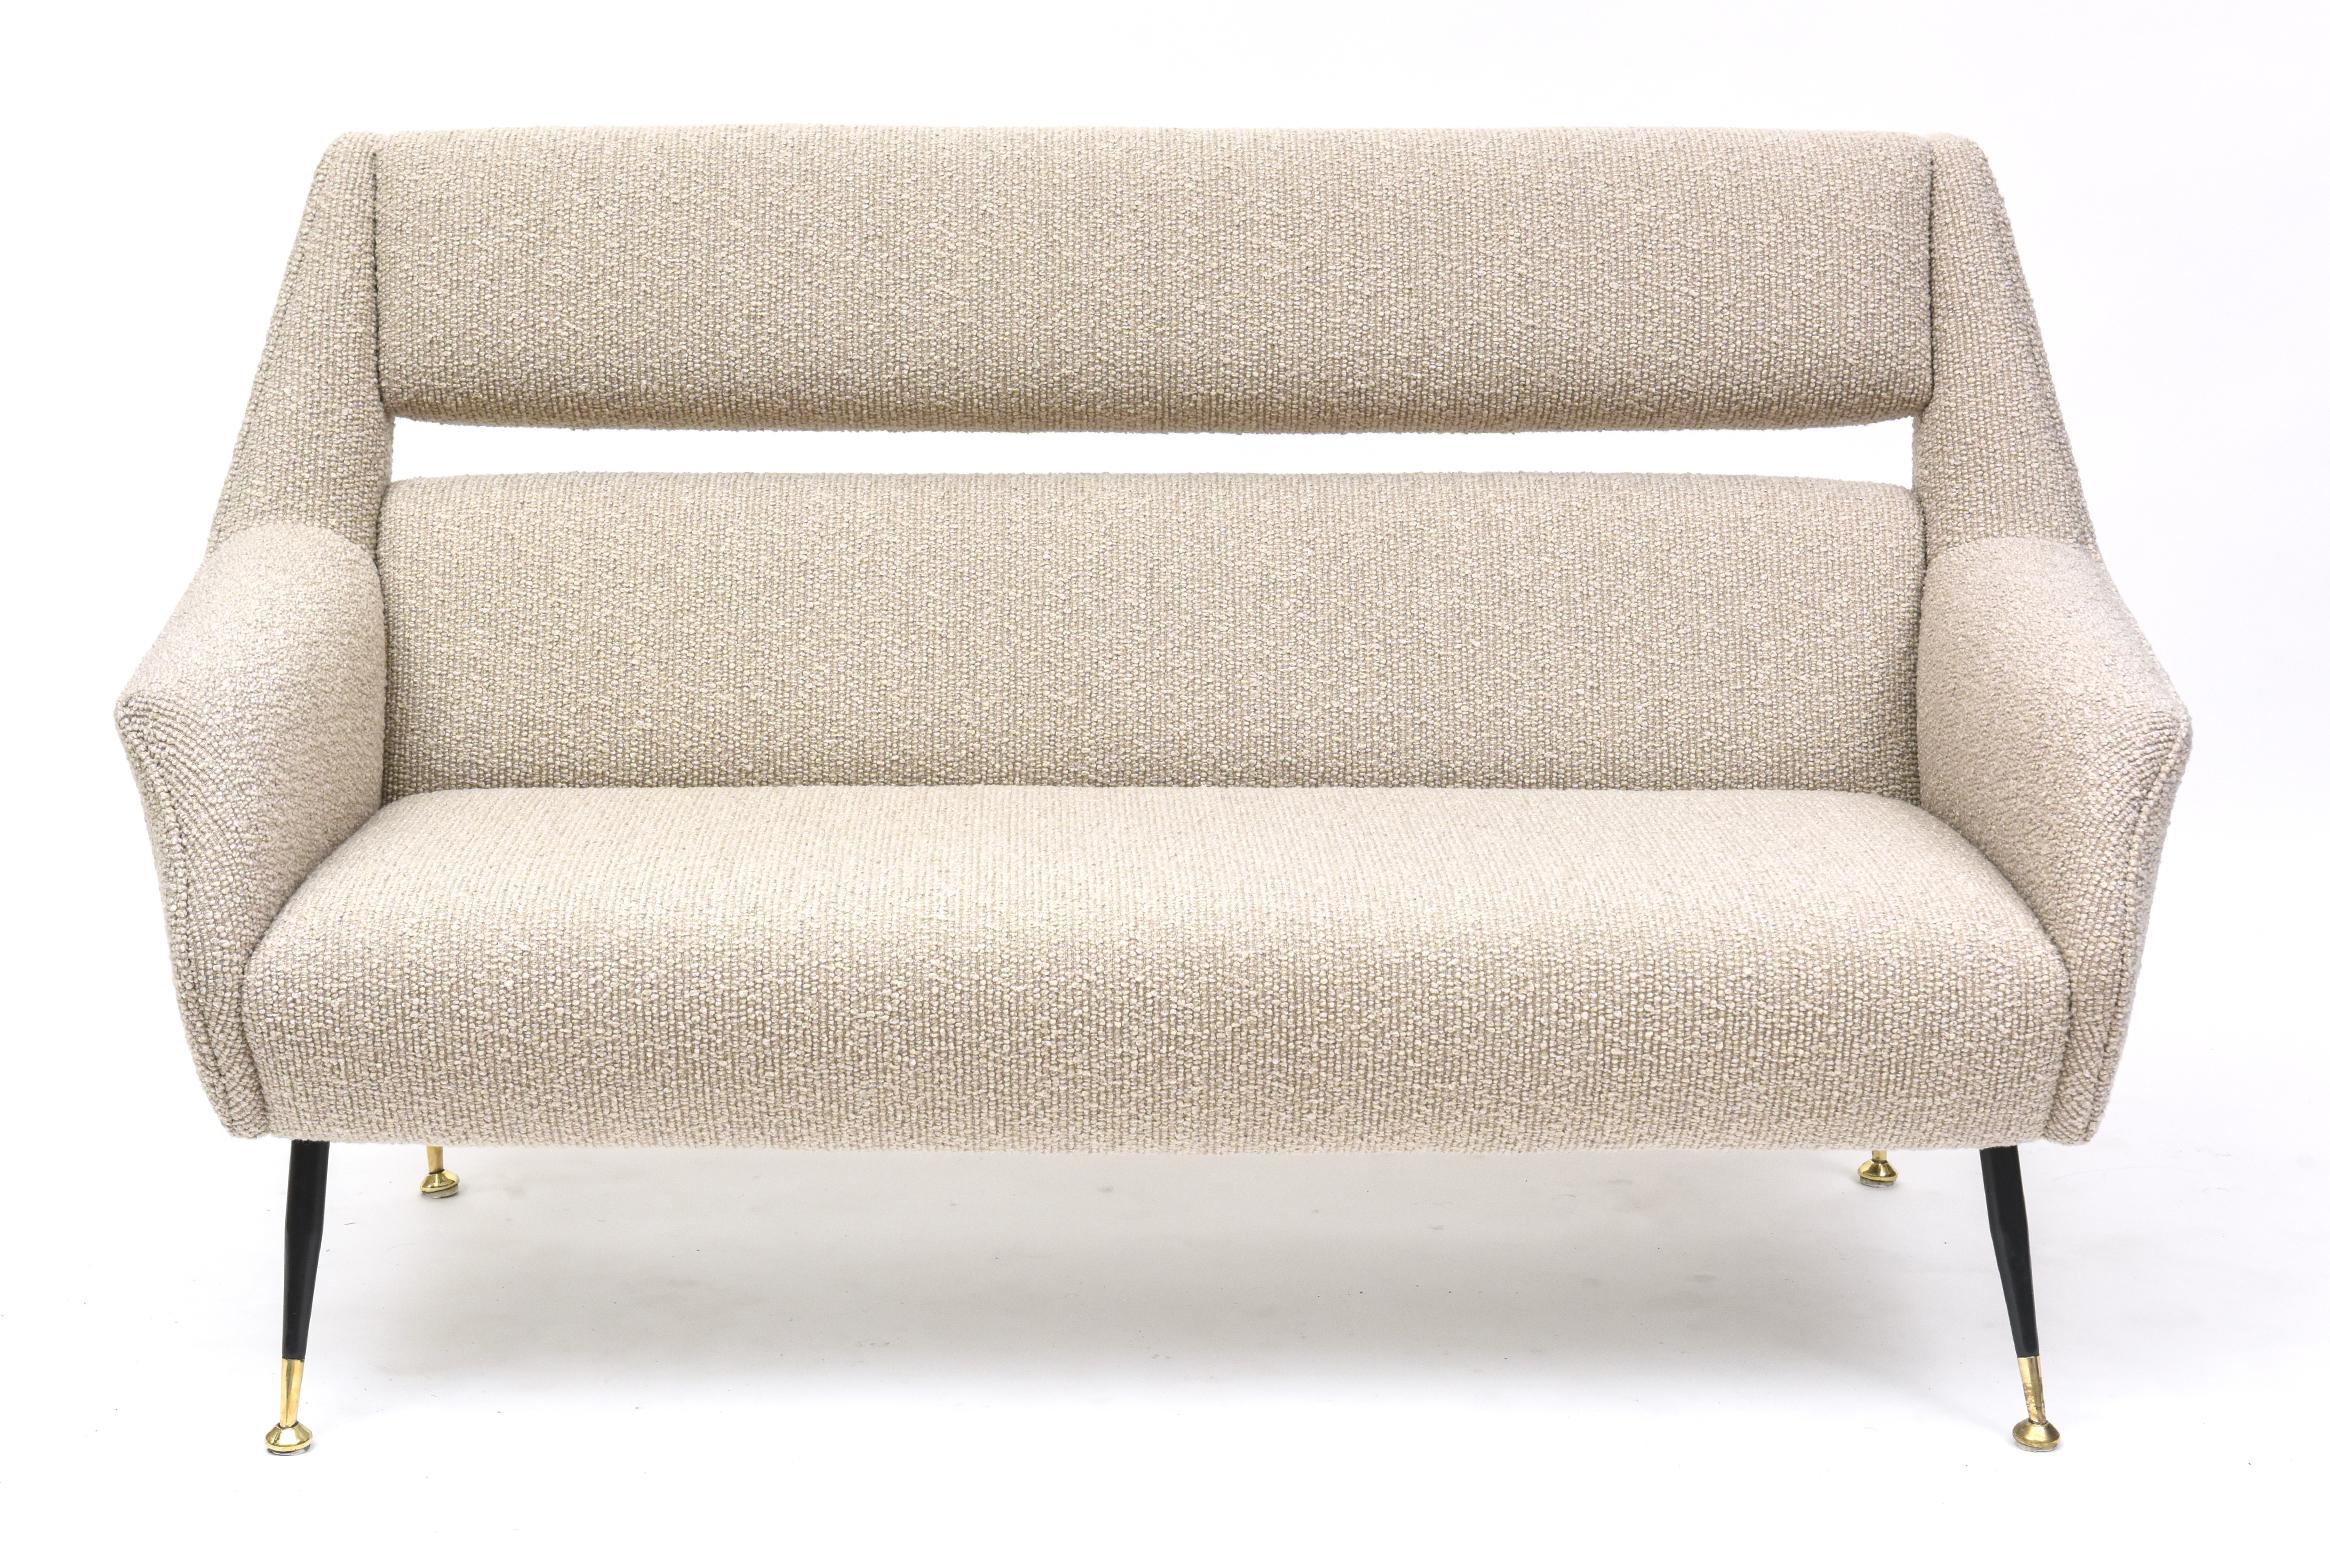 A quintessential 1950s Mid-Century Italian loveseat by Gigi Radice for Minotti, upholstered in a luxe wool boucle by Beacon Hill, perched on black enameled steel legs with with polished brass feet. Ciao, bella!